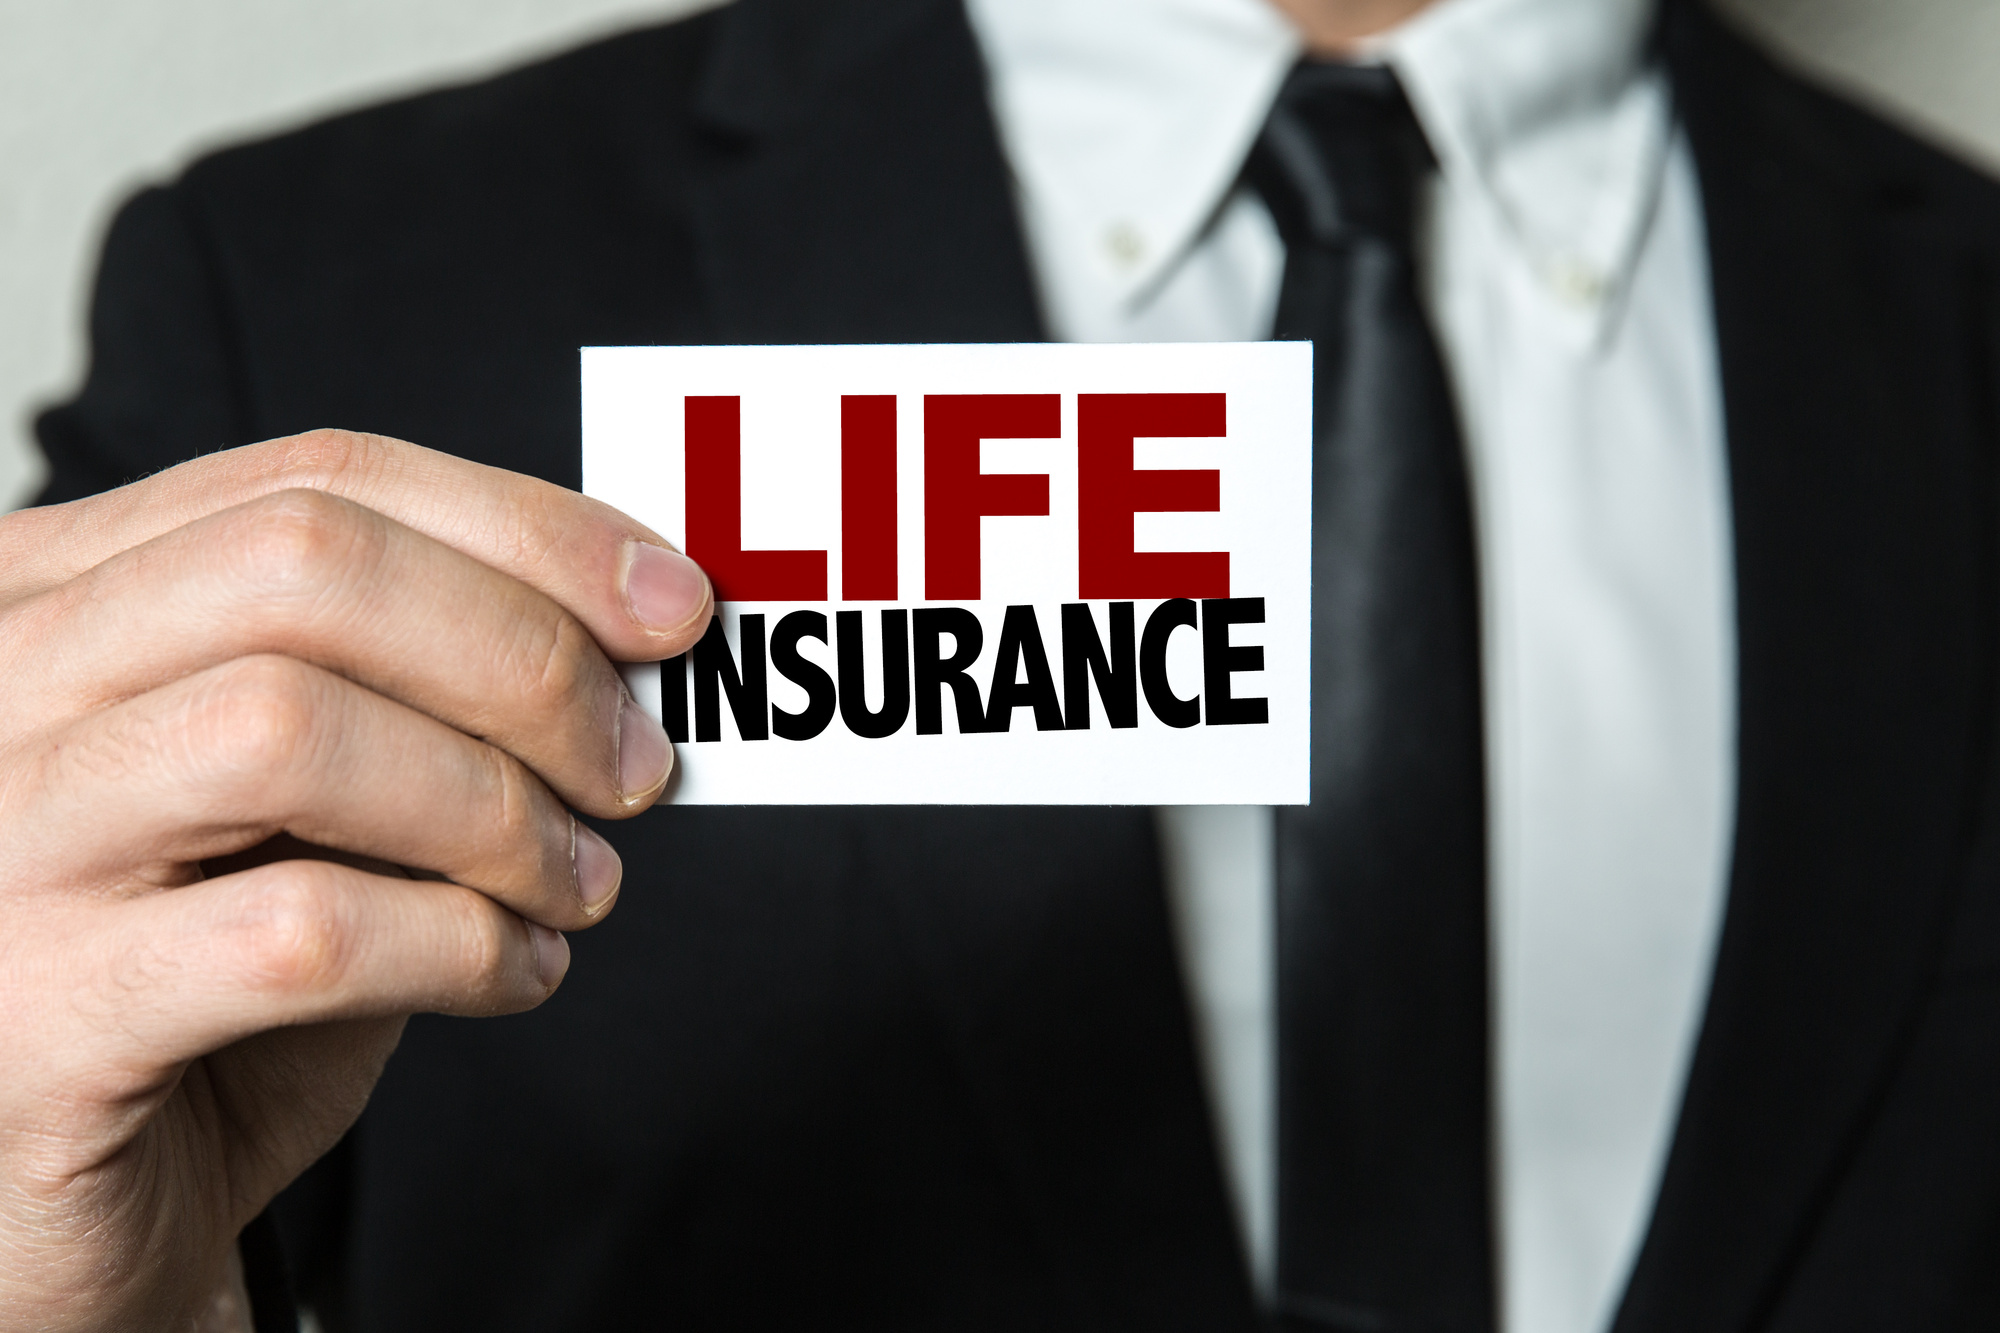 Whole Life Insurance vs. Term Life Insurance: What You Need to Know